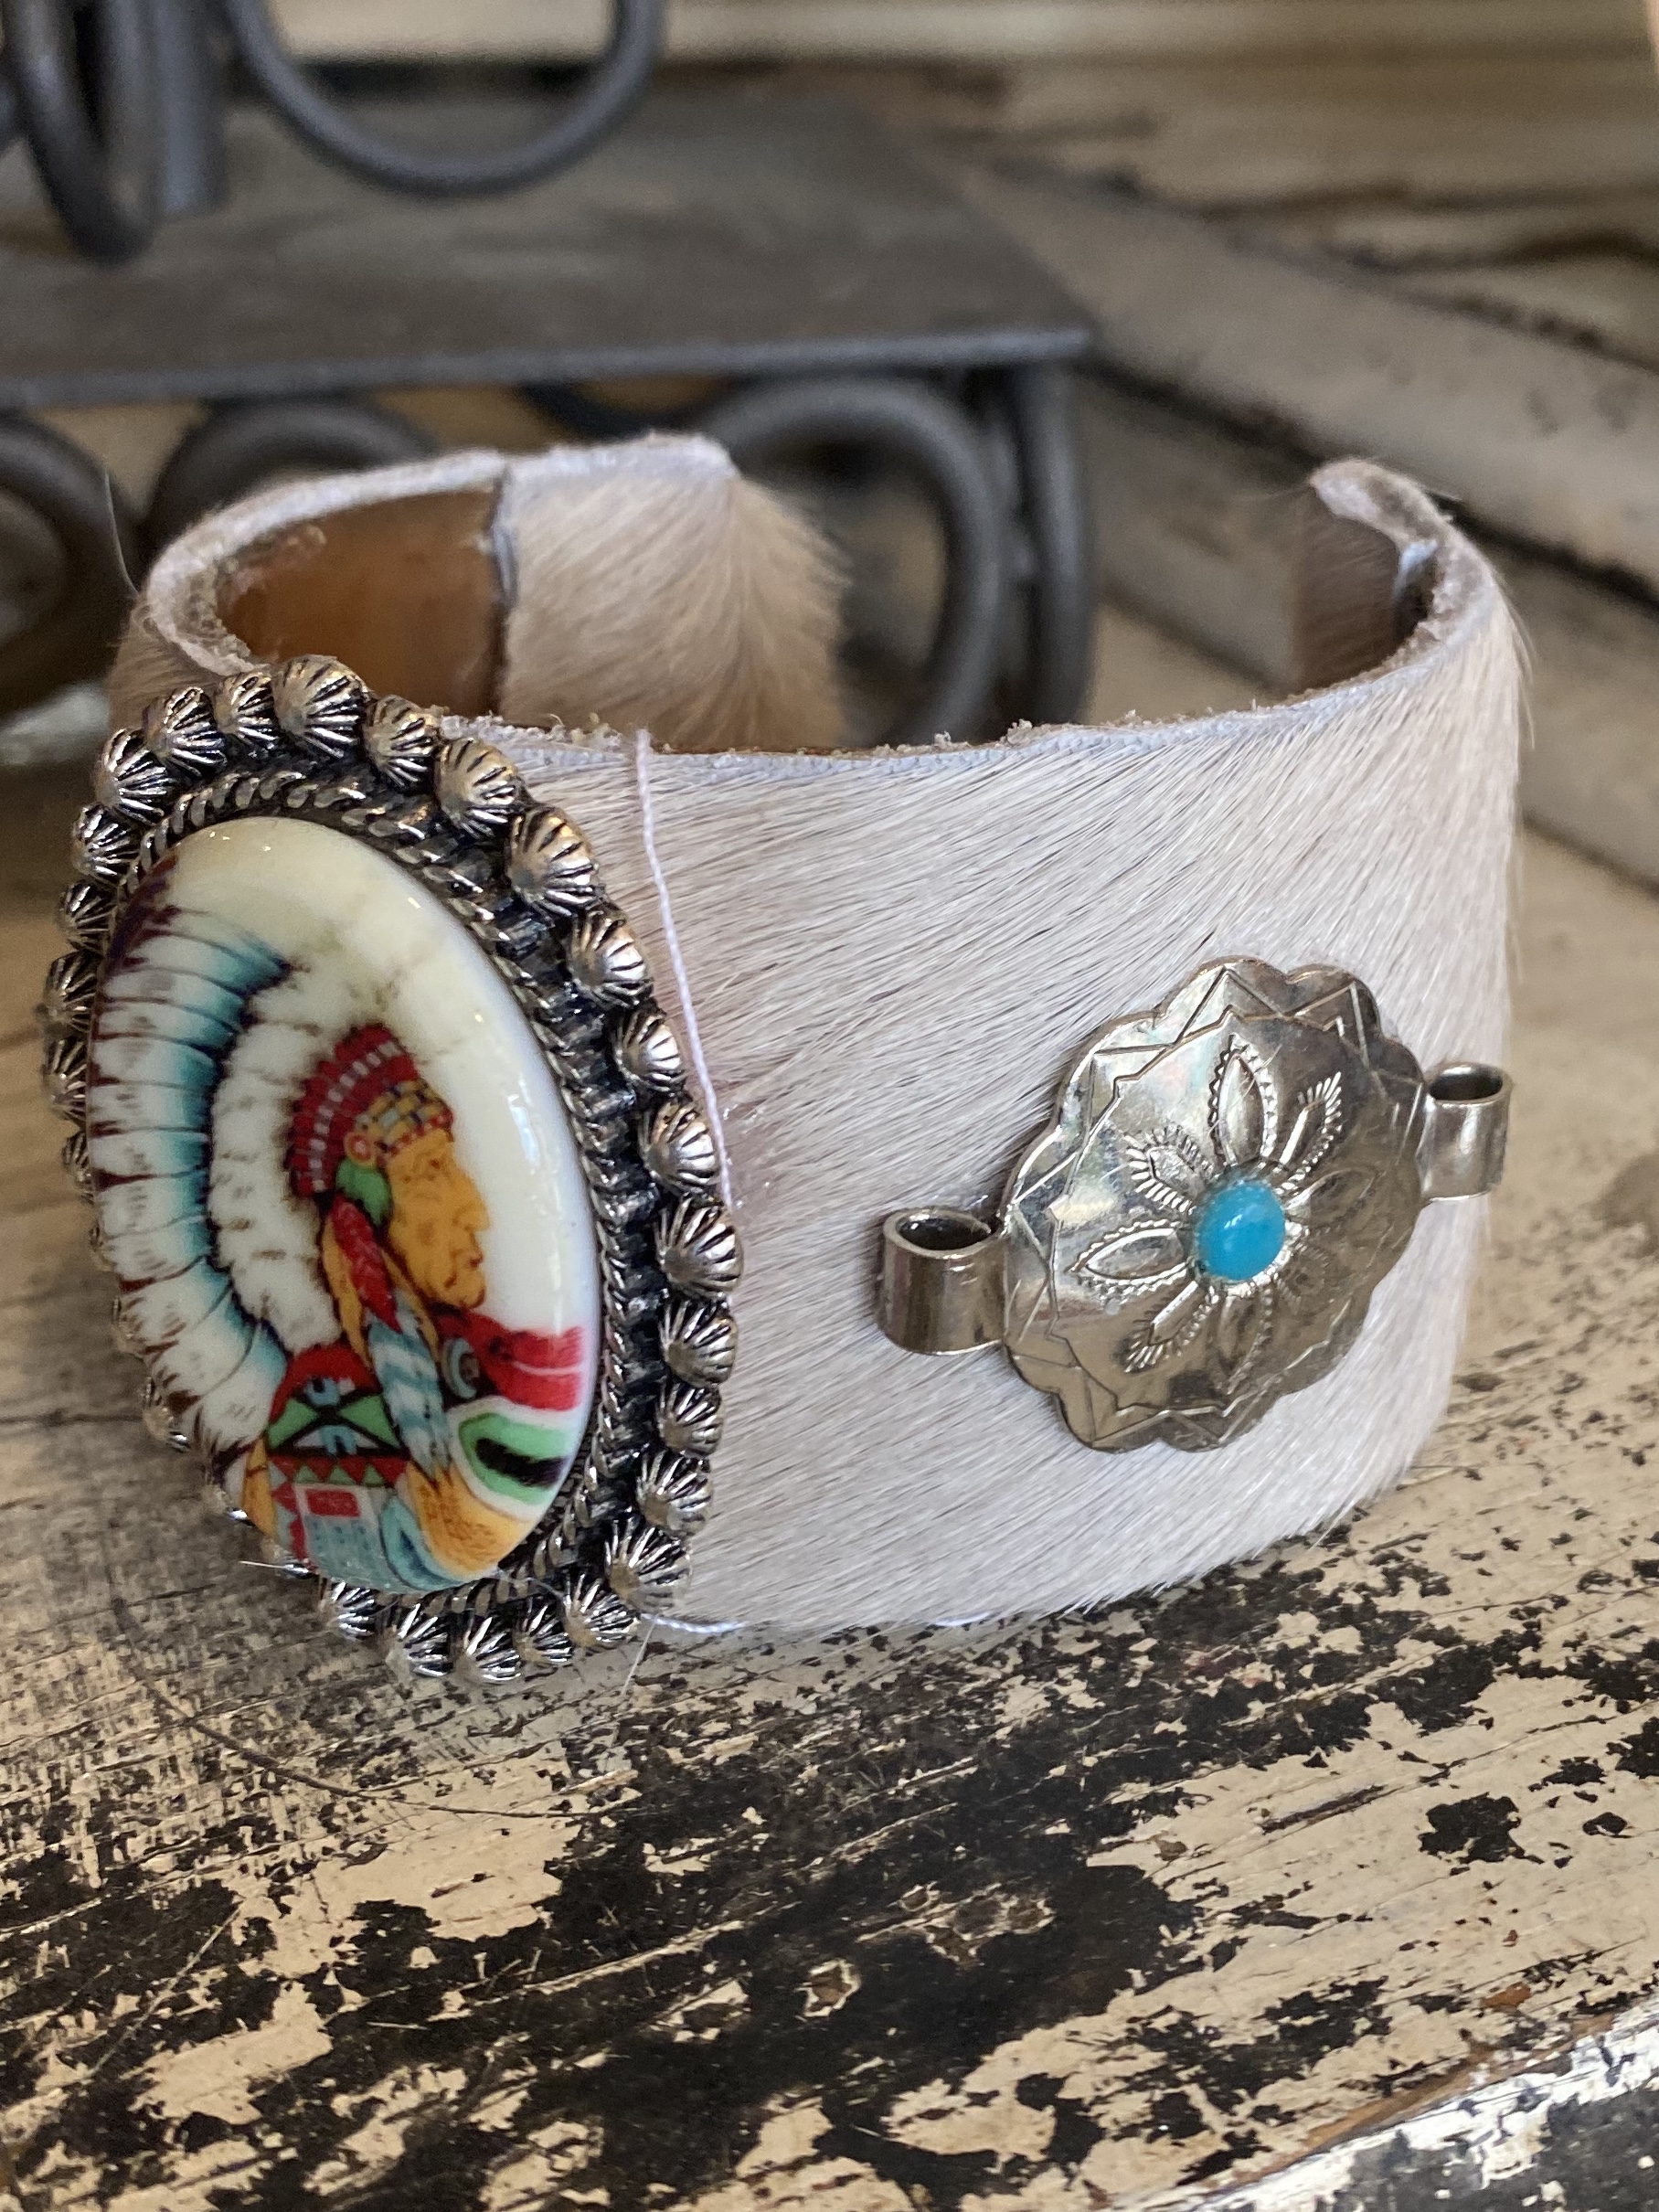 This is a one of a kind handmade cowhide cuff bracelet with Native American and Western touches.